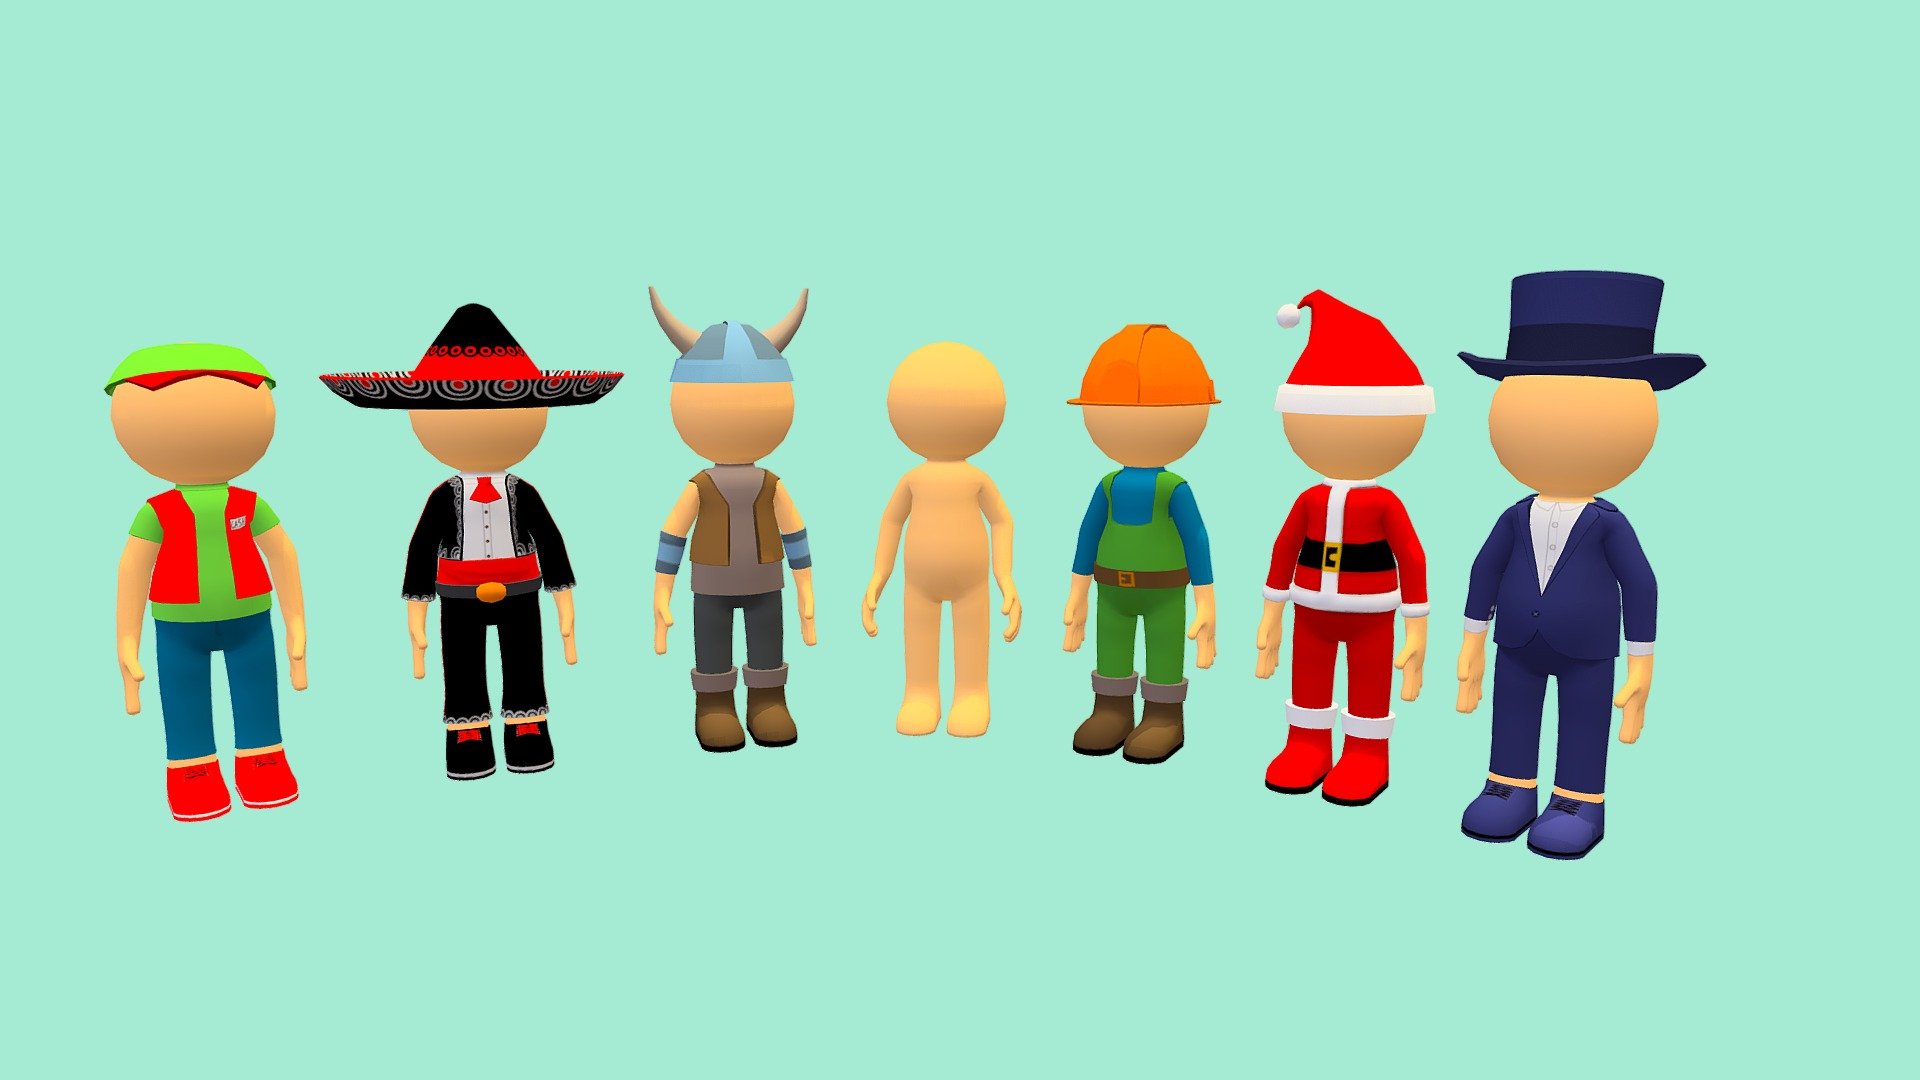 This asset contains a pack of hyper-casual characters
The pack includes: Cashier, Worker, Mexican, Viking, Suit Man, Santa Claus and Standard Stickman Model.
All characters have an attached humanoid skeleton.
Model has 13 animation: hit, death, idle, idle_hello, punch, walk, walk_RM, jump, jump_forward, run, run_RM, run_jump, run_jump_RM
All characters support humanoid animation which you can get from other sources. Such as mixamo.com
Models have an average of 4500 triangles
If you have any questions, please contact us by mail: Chester9292@mail.ru - Hyper-Casual Stickman Pack - Buy Royalty Free 3D model by Rifat3D 3d model